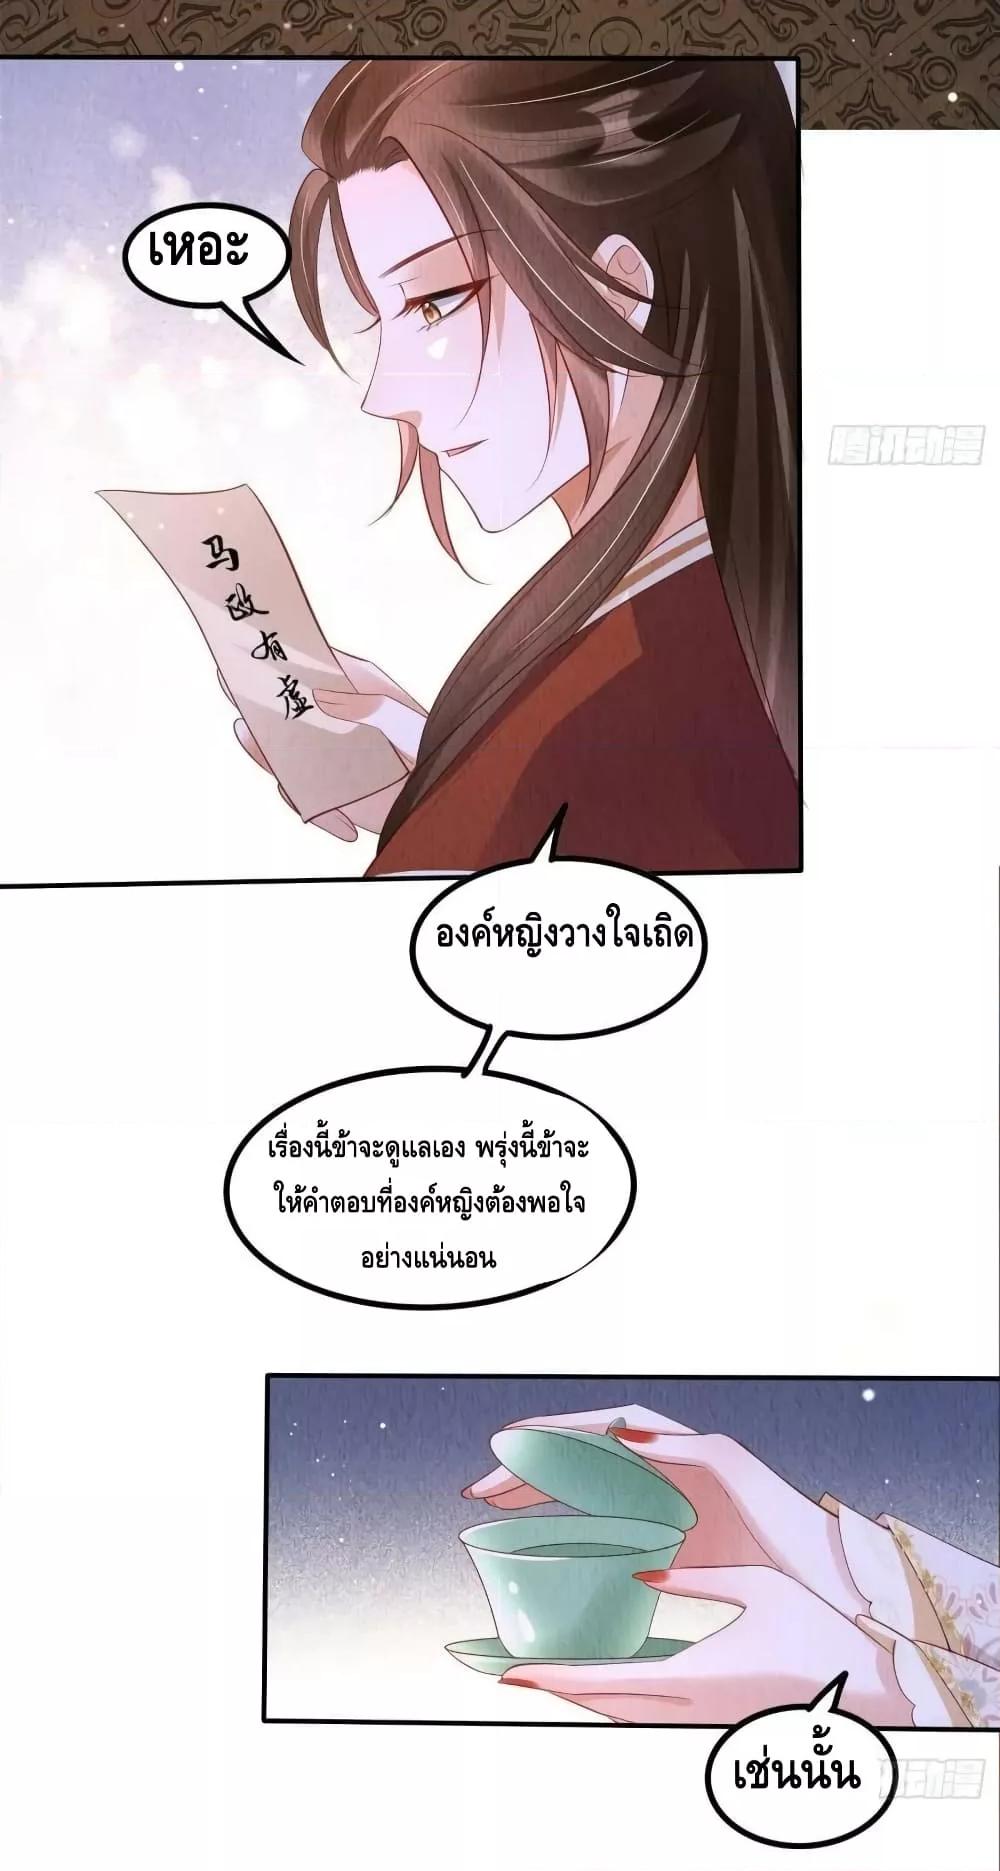 After I Bloom, a Hundred Flowers Will ill – ดอกไม้นับ ตอนที่ 53 (17)